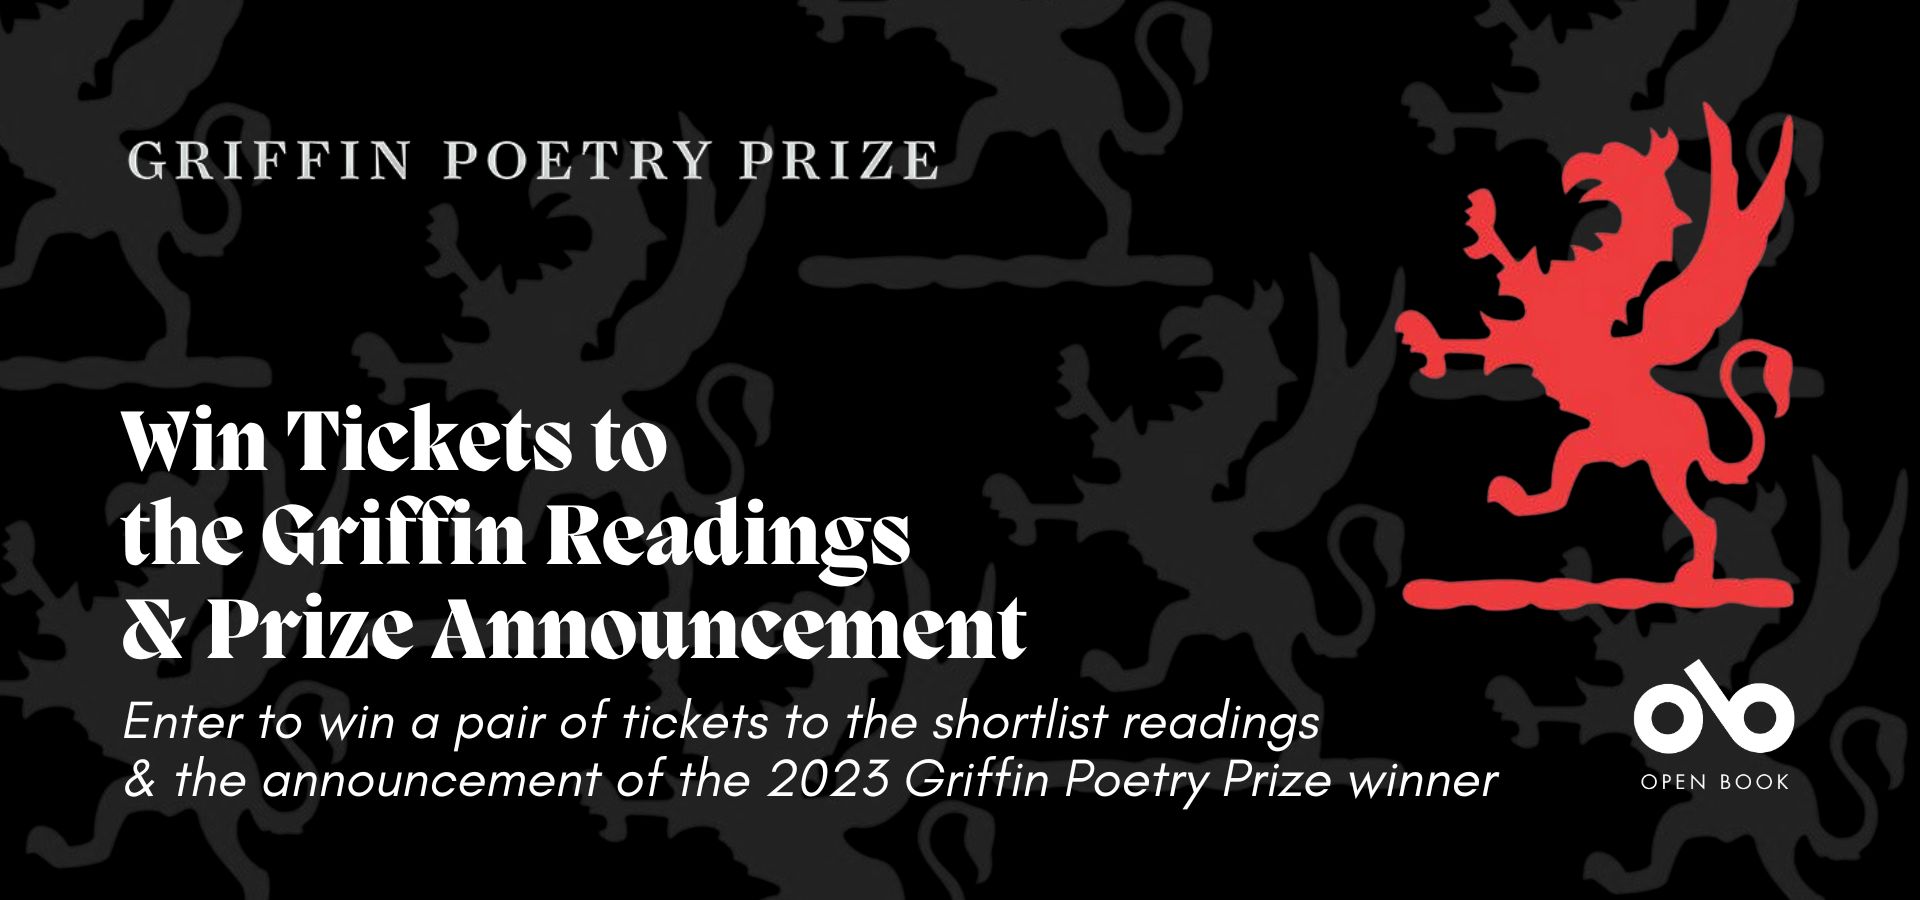 black banner image with the red Griffin Prize logo on the right and text reading "Win Tickets to the Griffin Readings & Prize Announcement. Enter to win a pair of tickets to the shortlist readings & the announcement of the 2023 Griffin Poetry Prize winner" Open Book logo bottom right